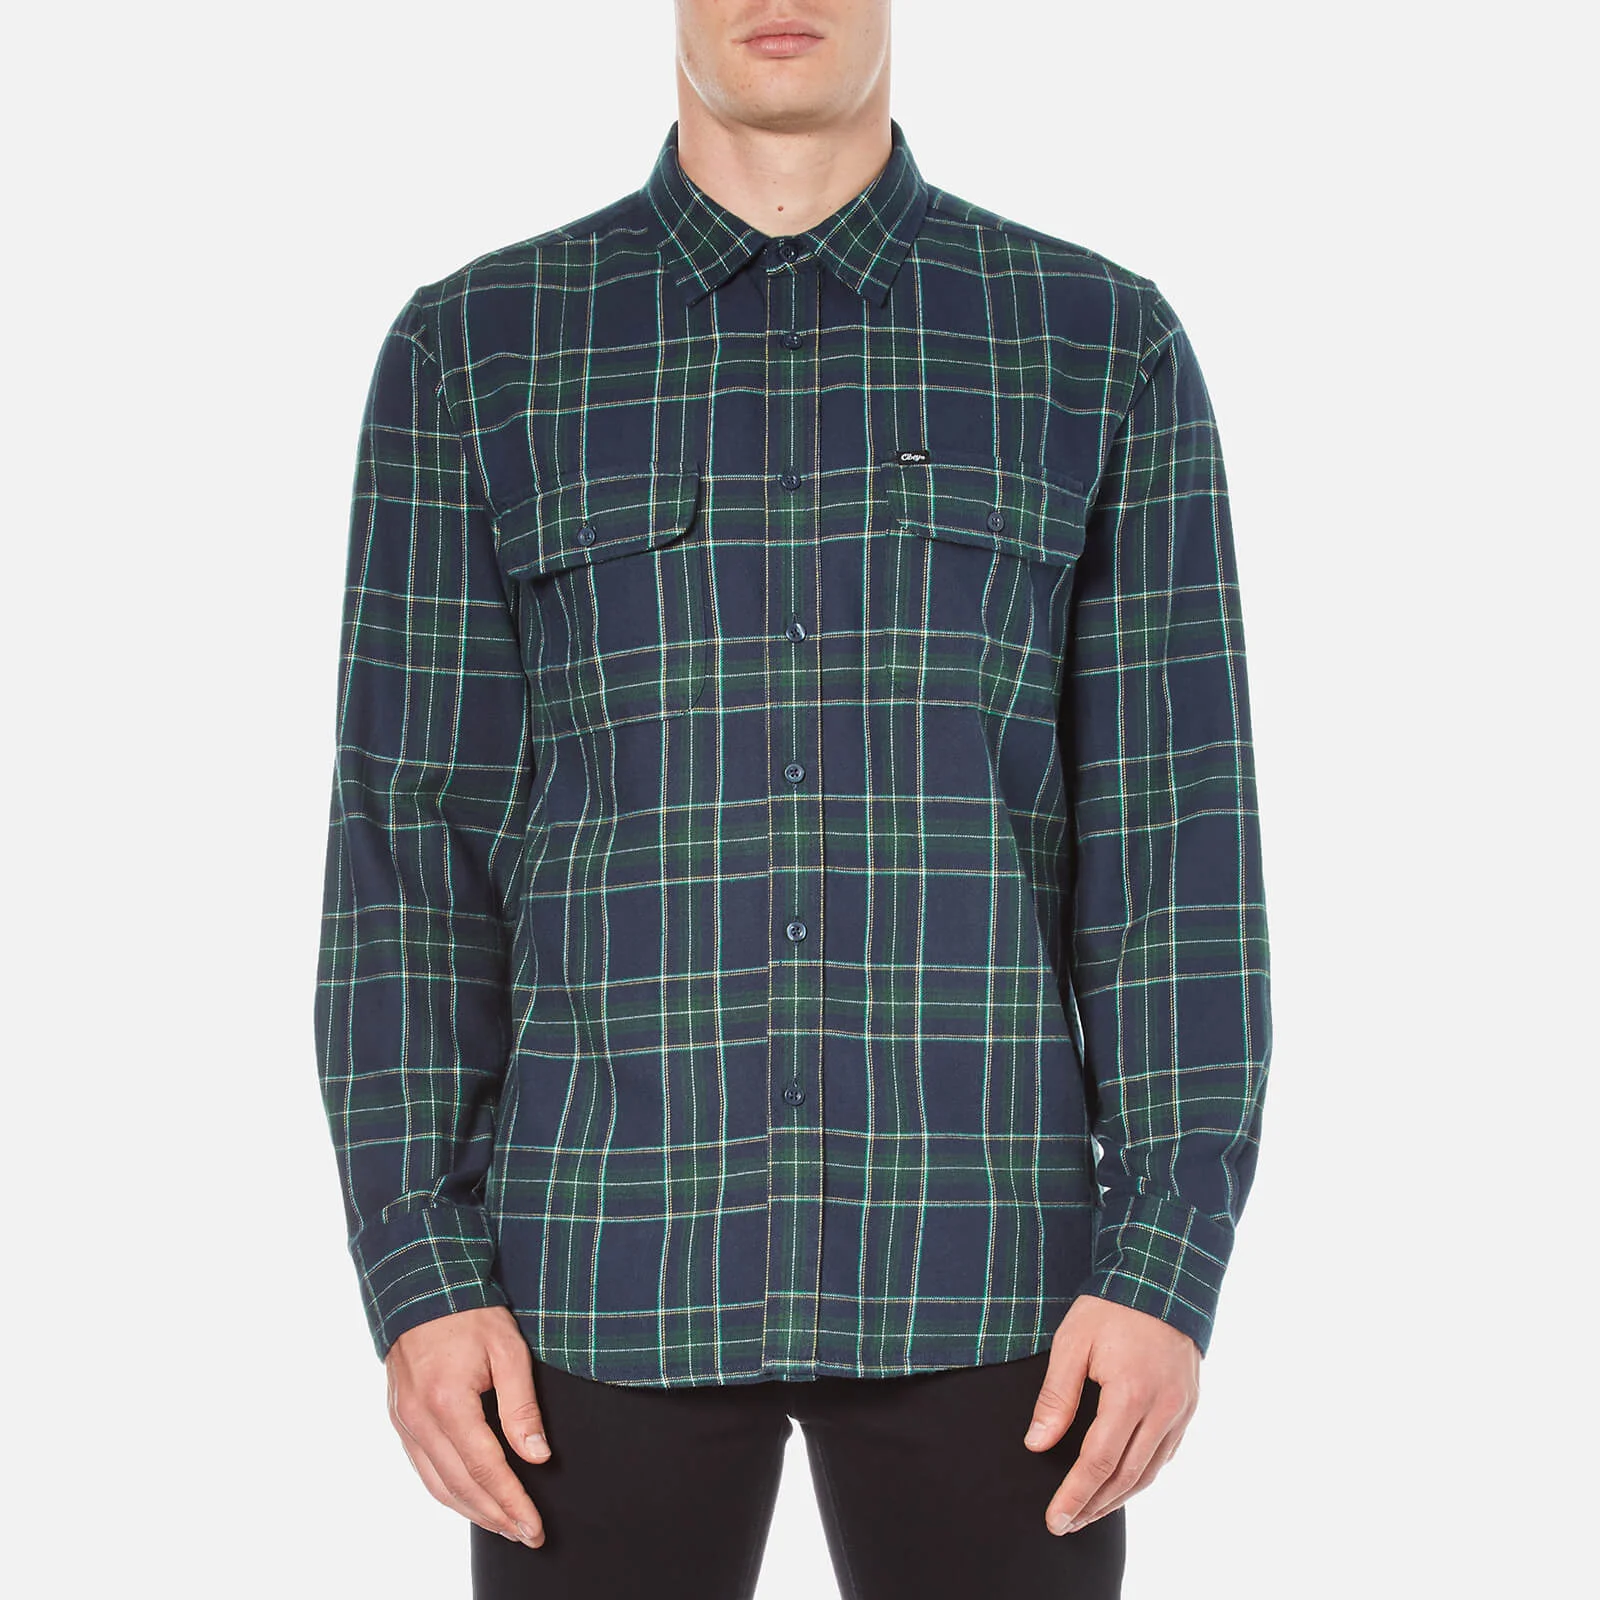 OBEY Clothing Men's Highland Plaid Flannel Shirt - Green Multi Image 1